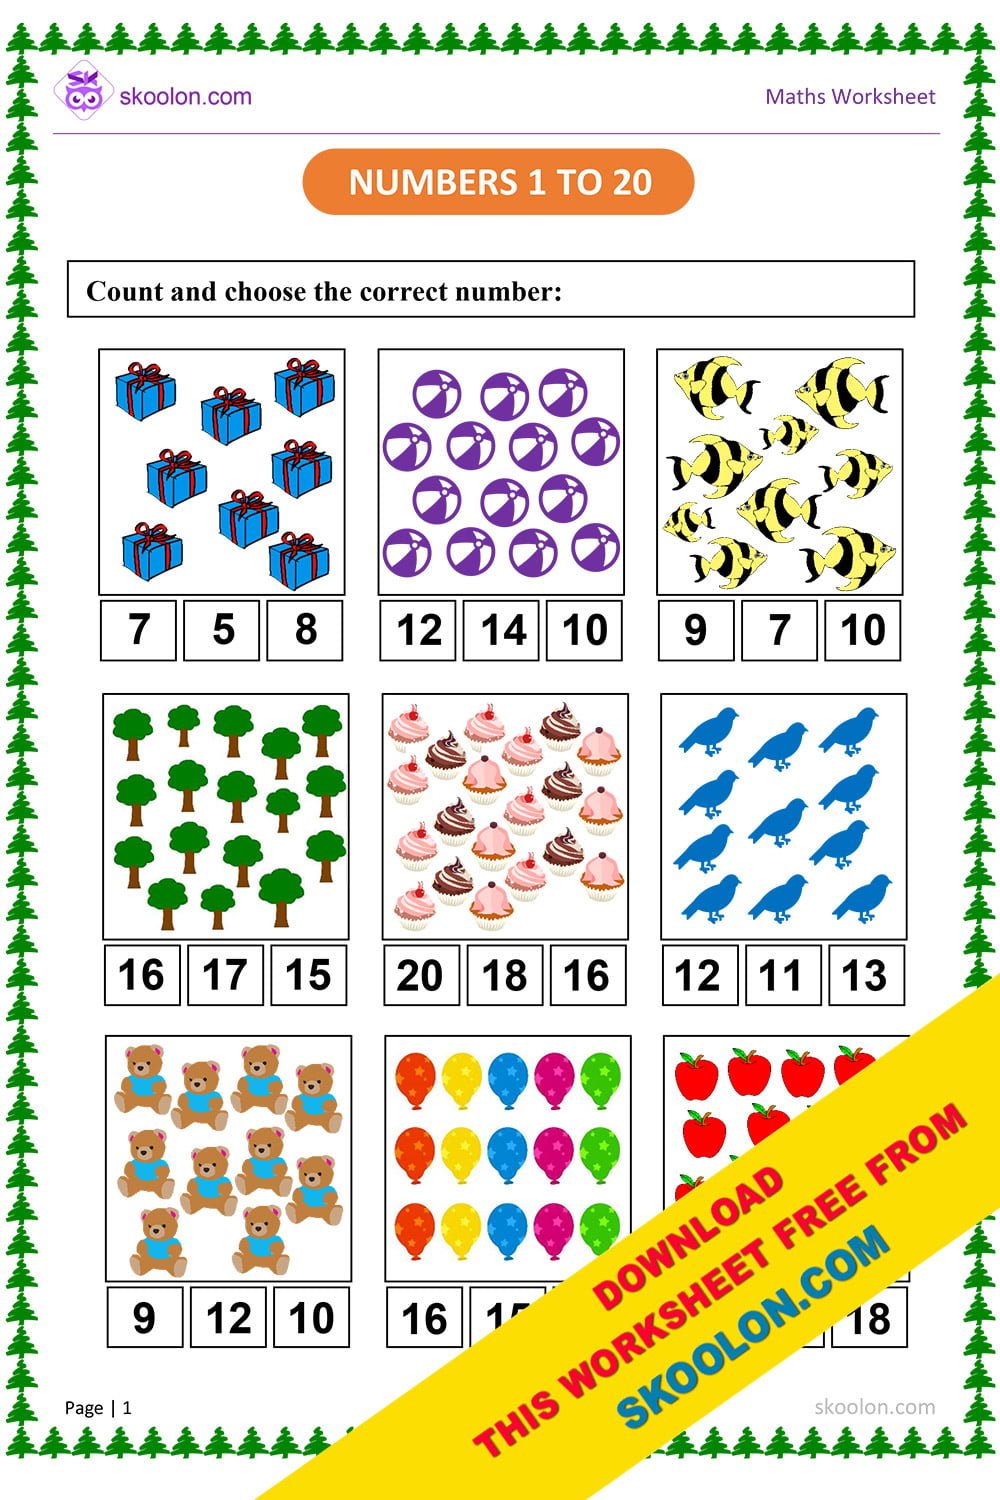 Count and Match Numbers 1 to 20 Worksheet for KG skoolon com